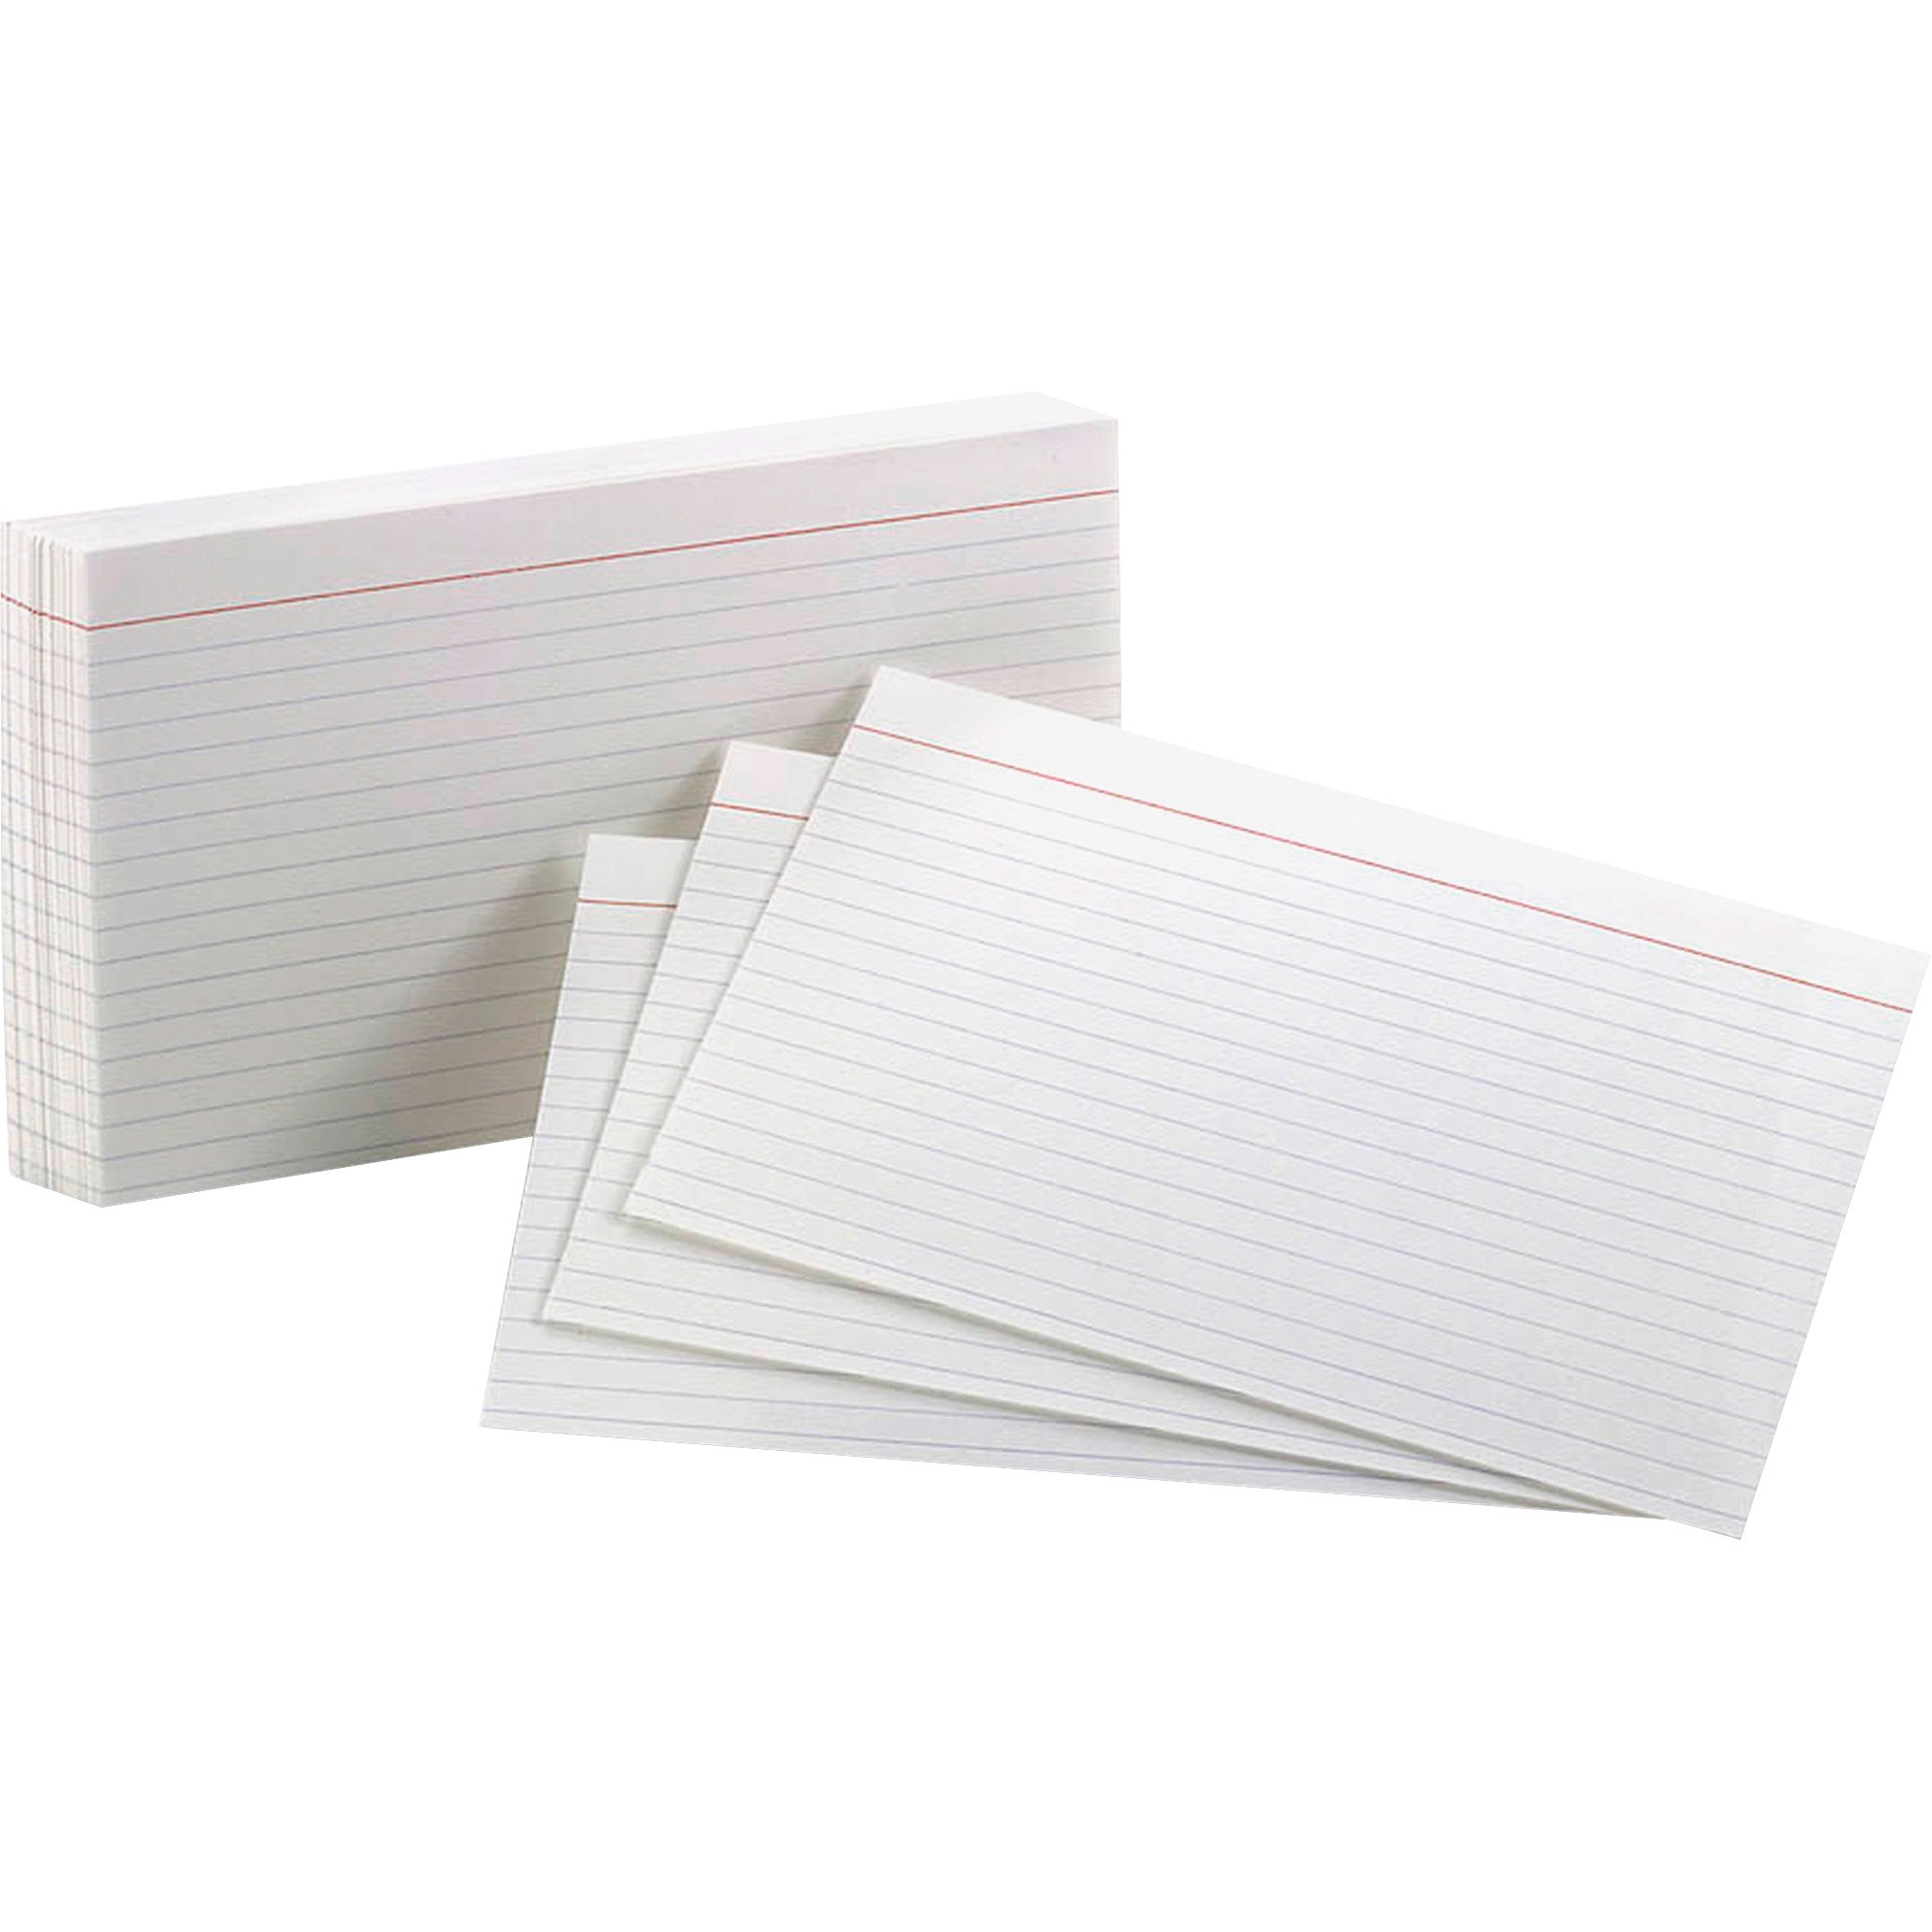 Oxford Index Cards - 3 x 5 - 85 lb Basis Weight - 100 / Pack -  Sustainable Forestry Initiative (SFI) - White - Cards/Cardstock, TOPS  Products